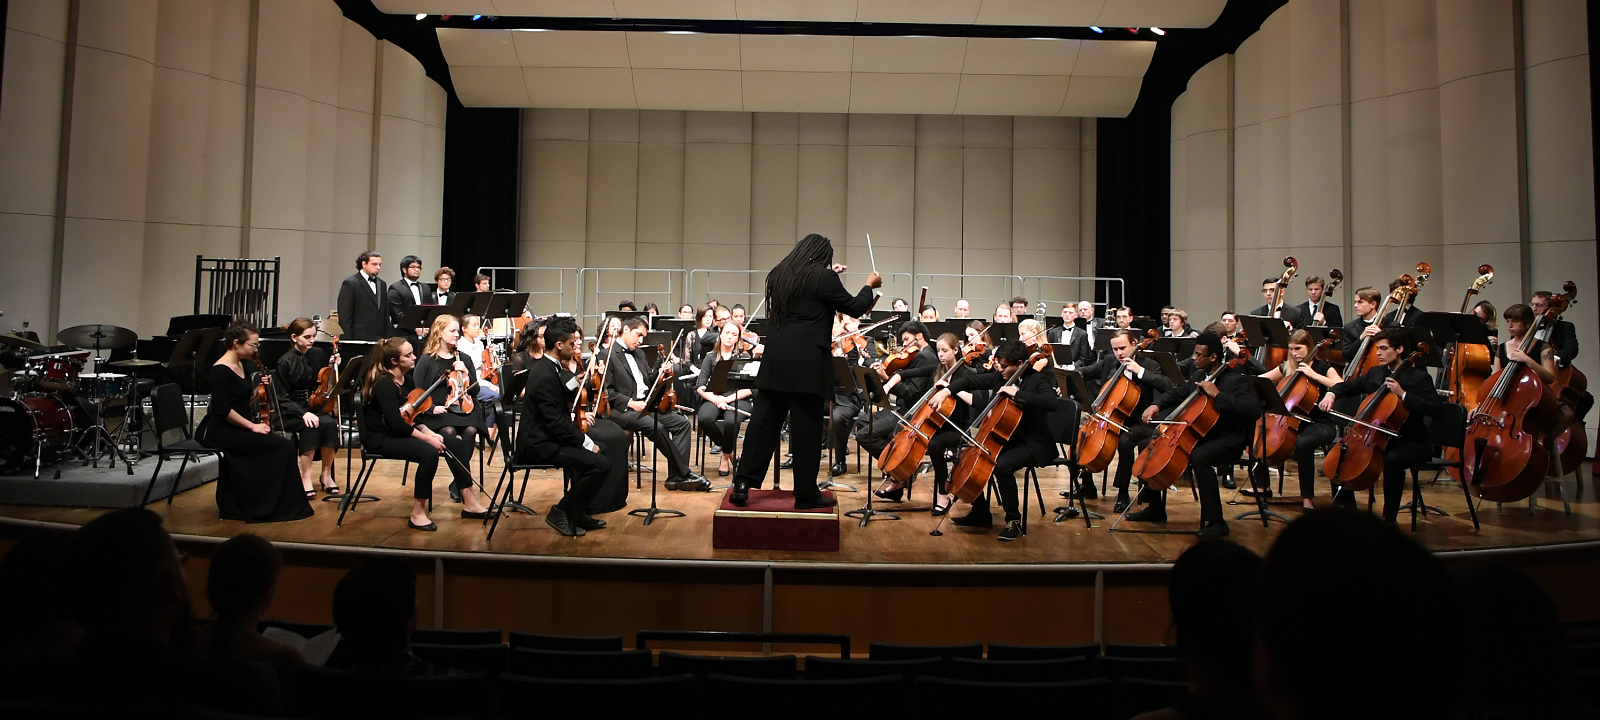 Learn more about our award-winning orchestras